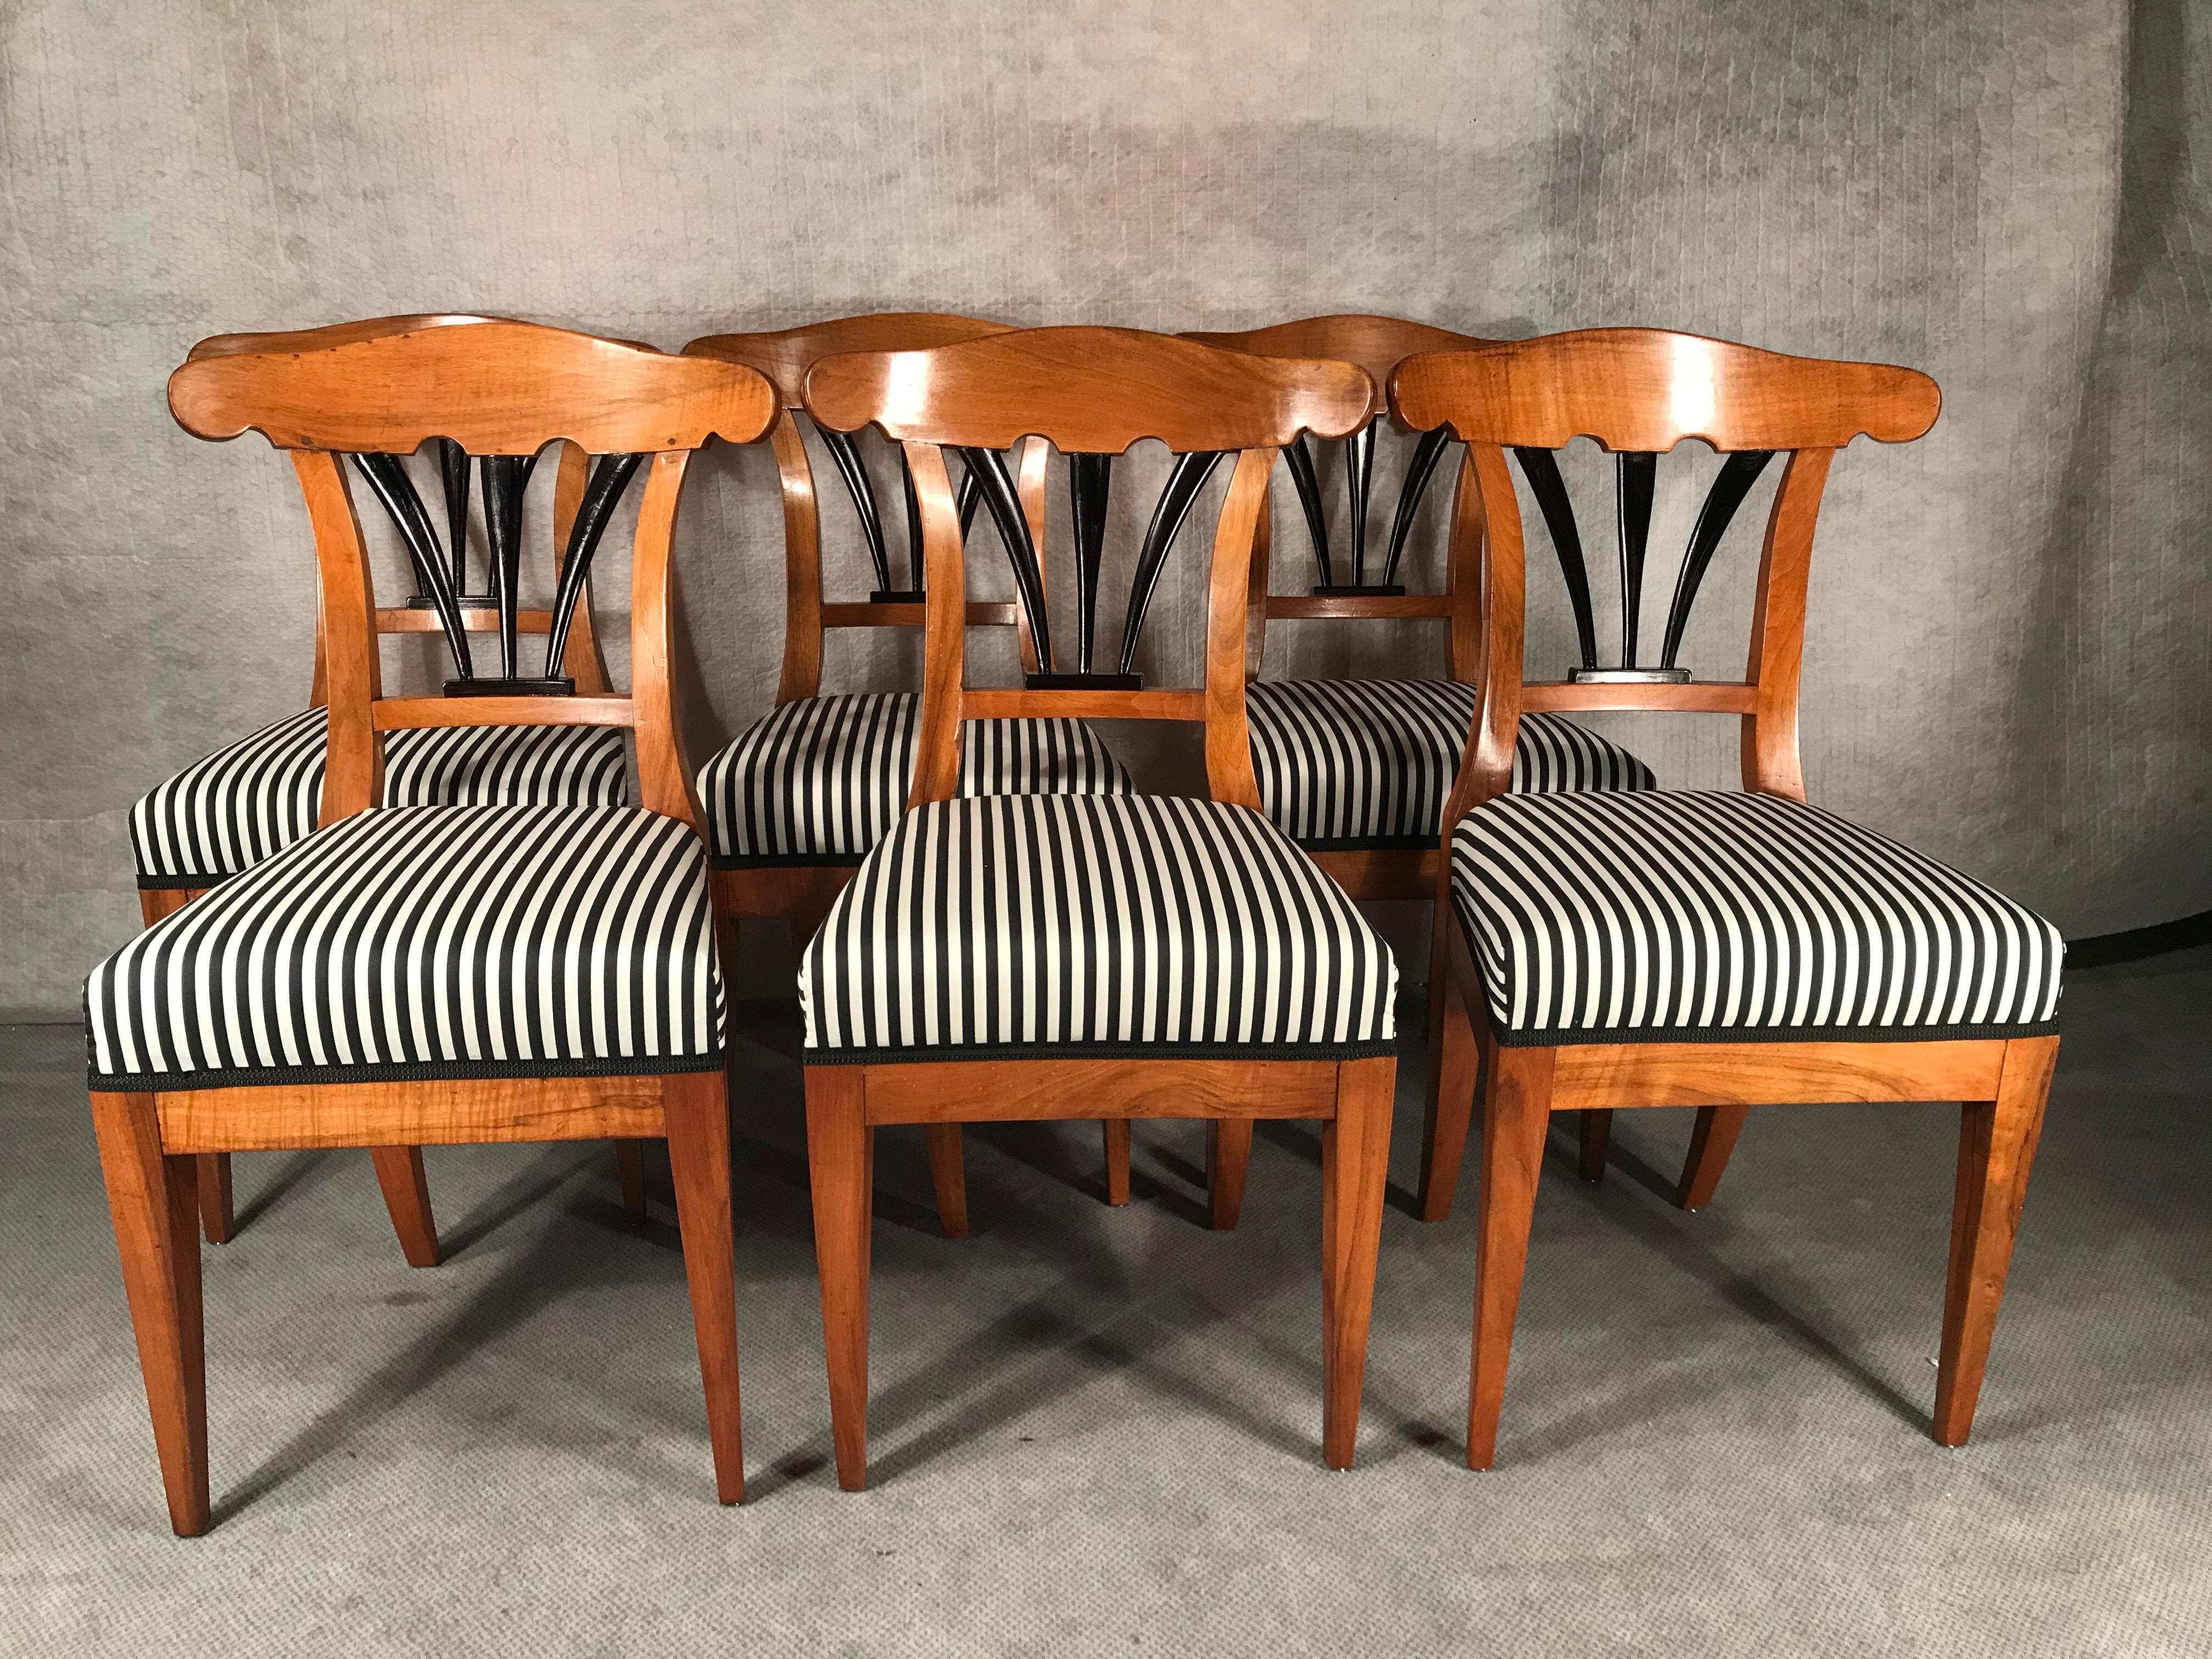 Set of six Biedermeier chairs, South German, 1825-1830, walnut veneer with ebonized details on the back. These beautiful chairs are in excellent refinished condition. They have a new upholstery and are covered with a gorgeous black and white striped